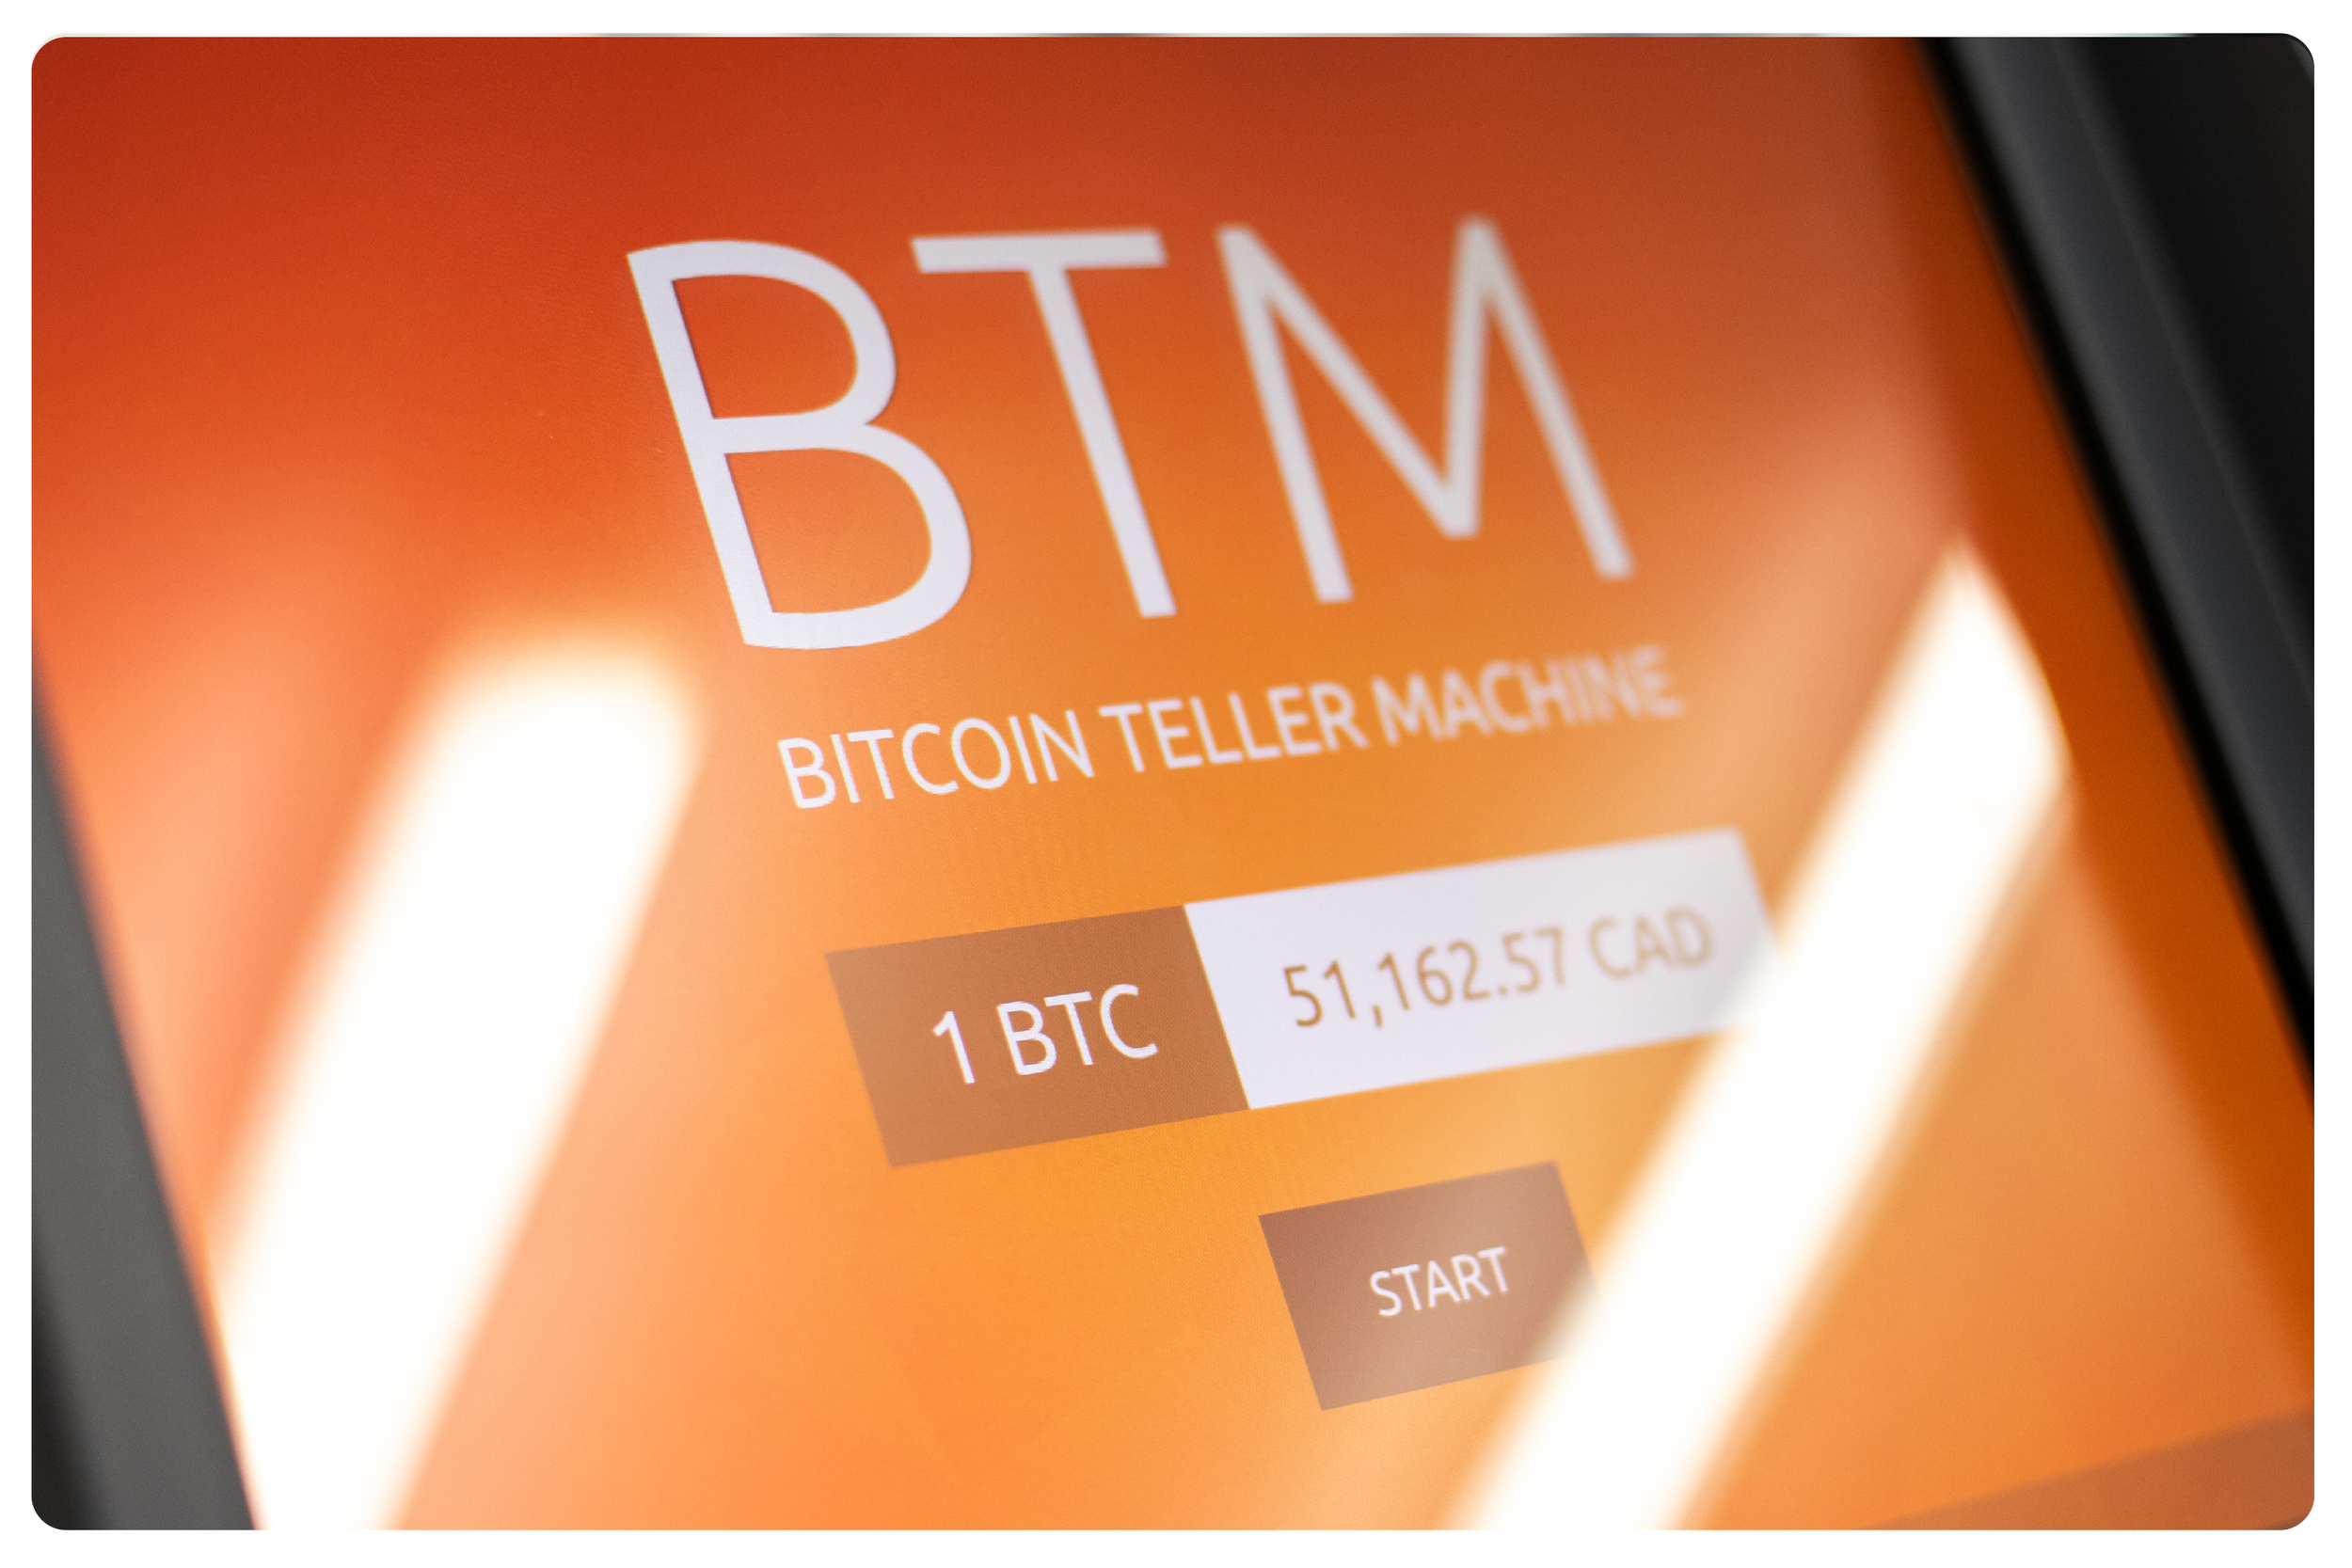 A Bitcoin ATM is an interactive kiosk that allows a person to buy and sell Bitcoins for cash.